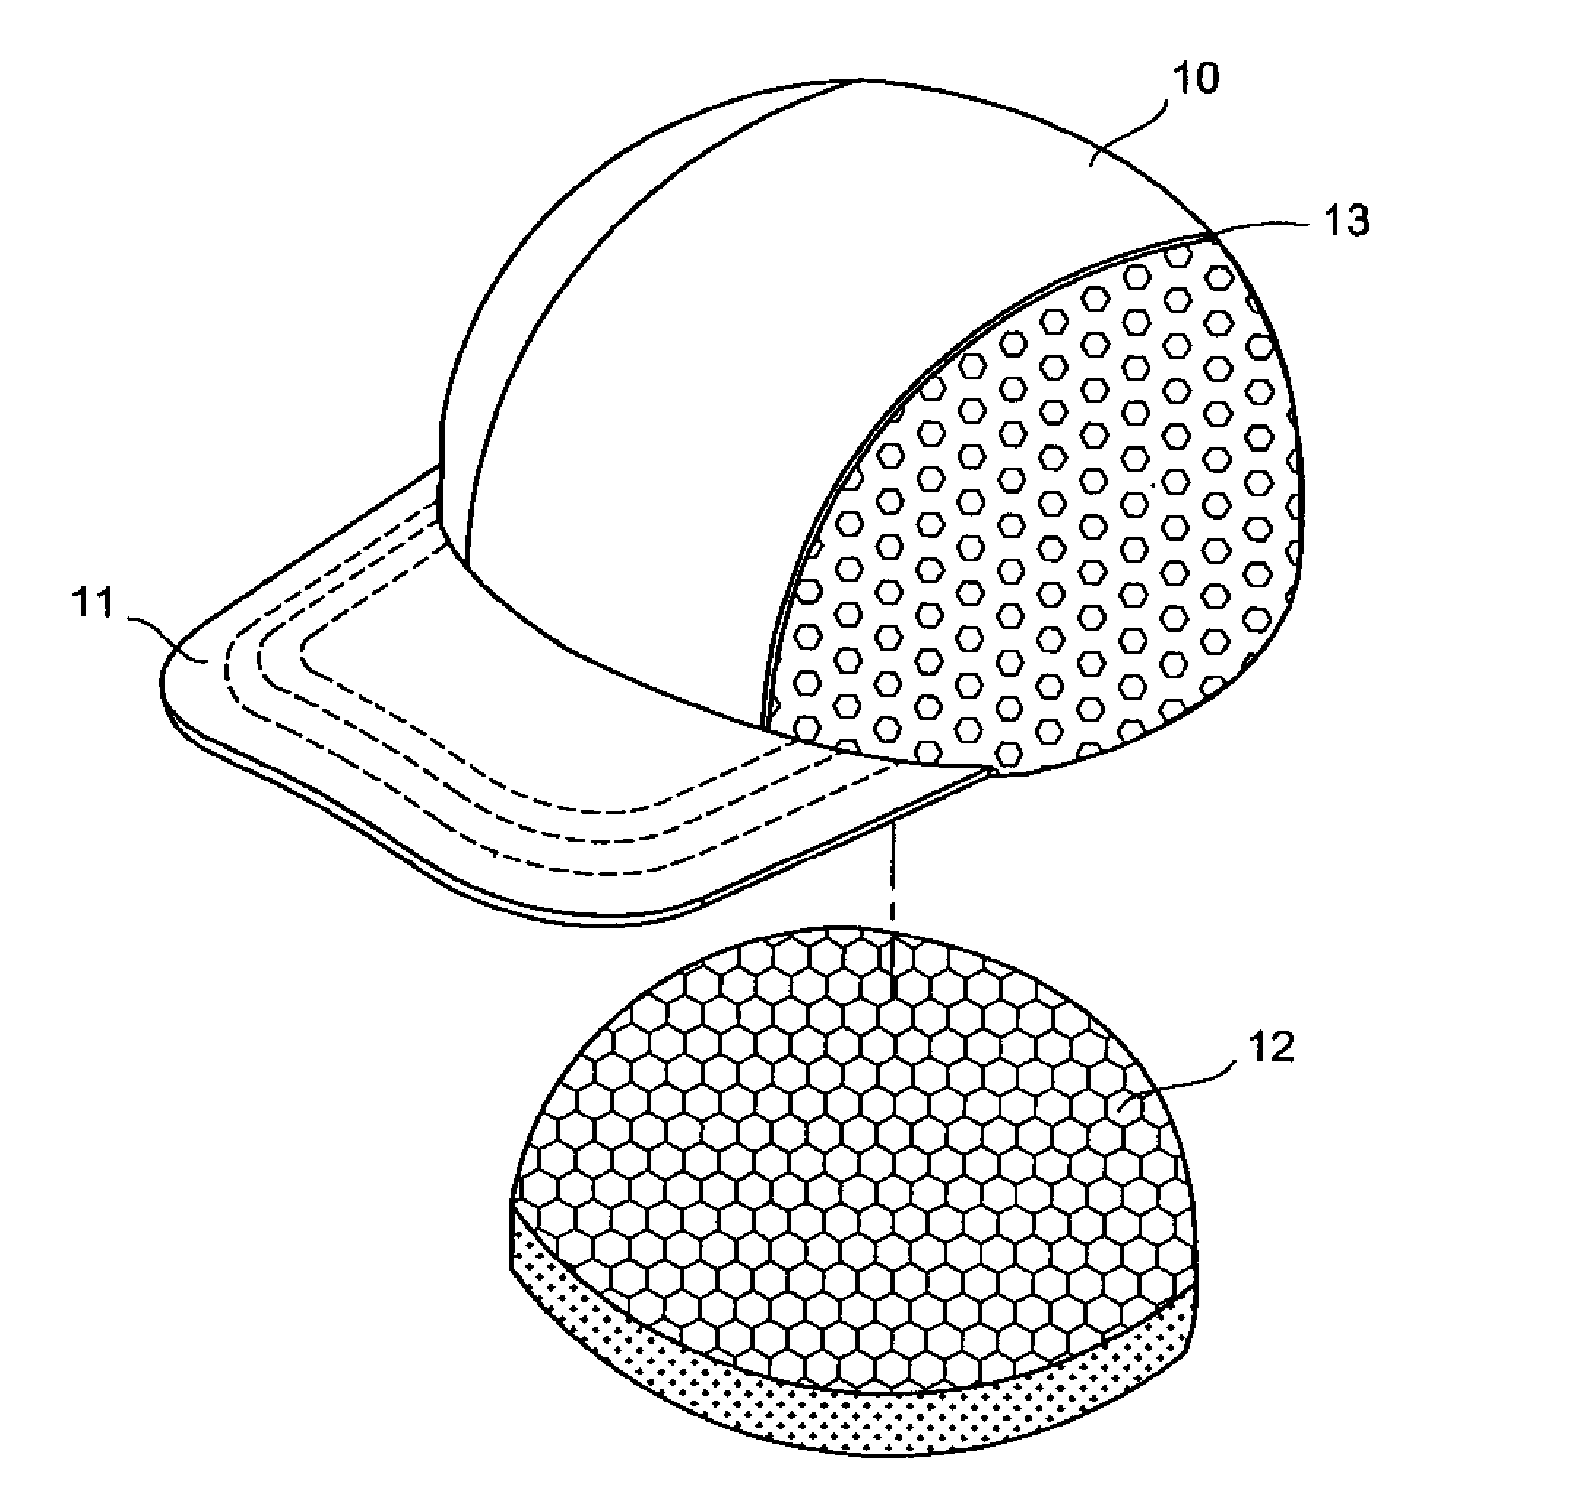 Impact-protection safety structure of headwear